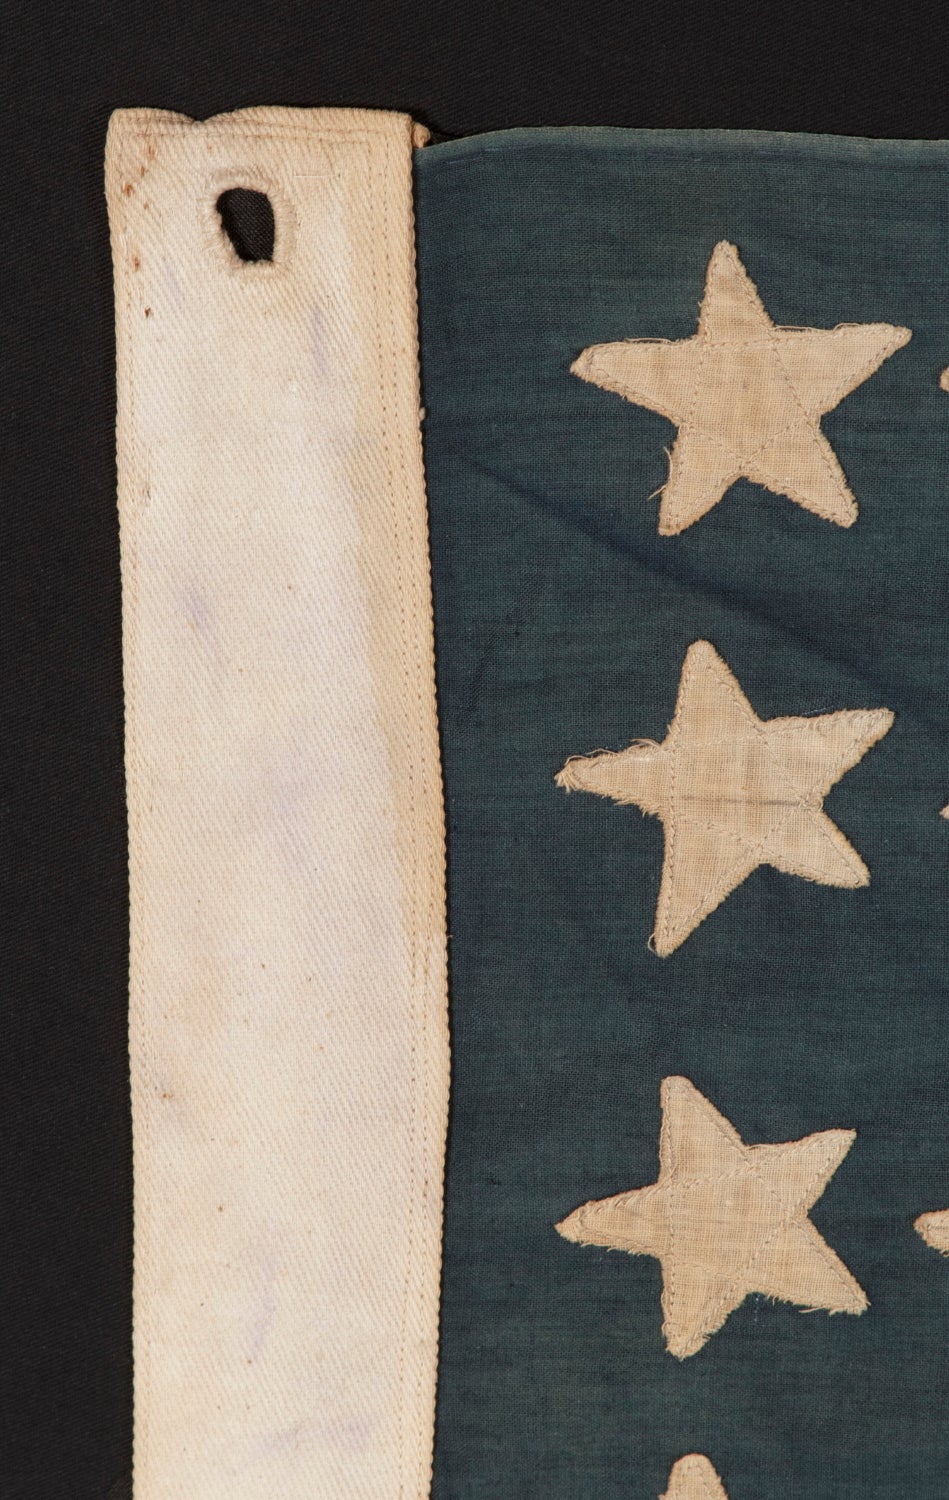 19th Century 45 Star Flag with Stars in a 